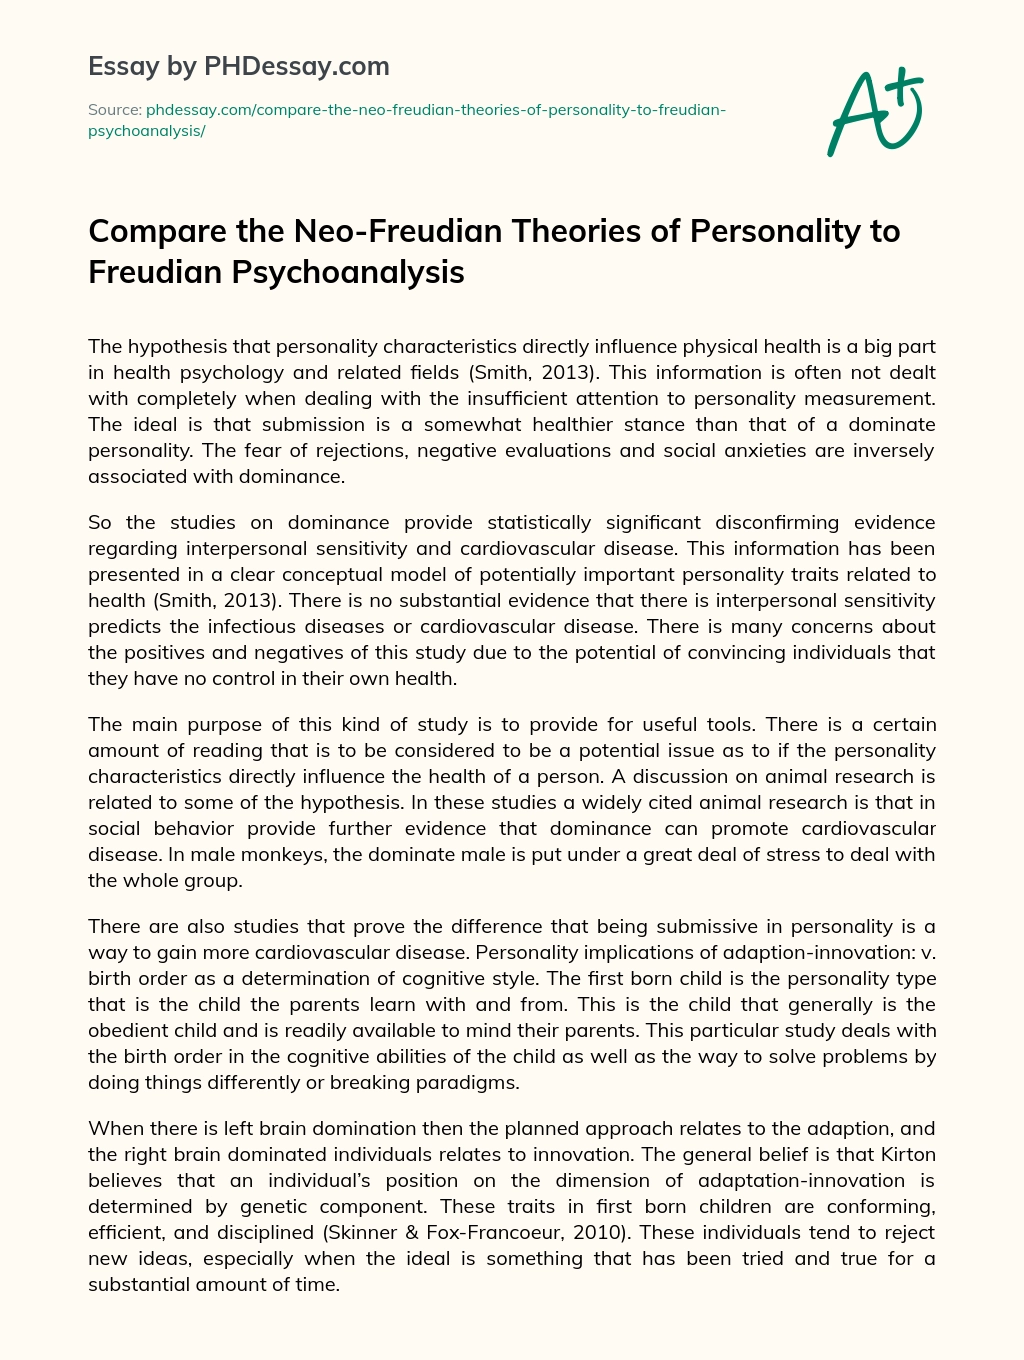 Compare the Neo-Freudian Theories of Personality to Freudian Psychoanalysis essay